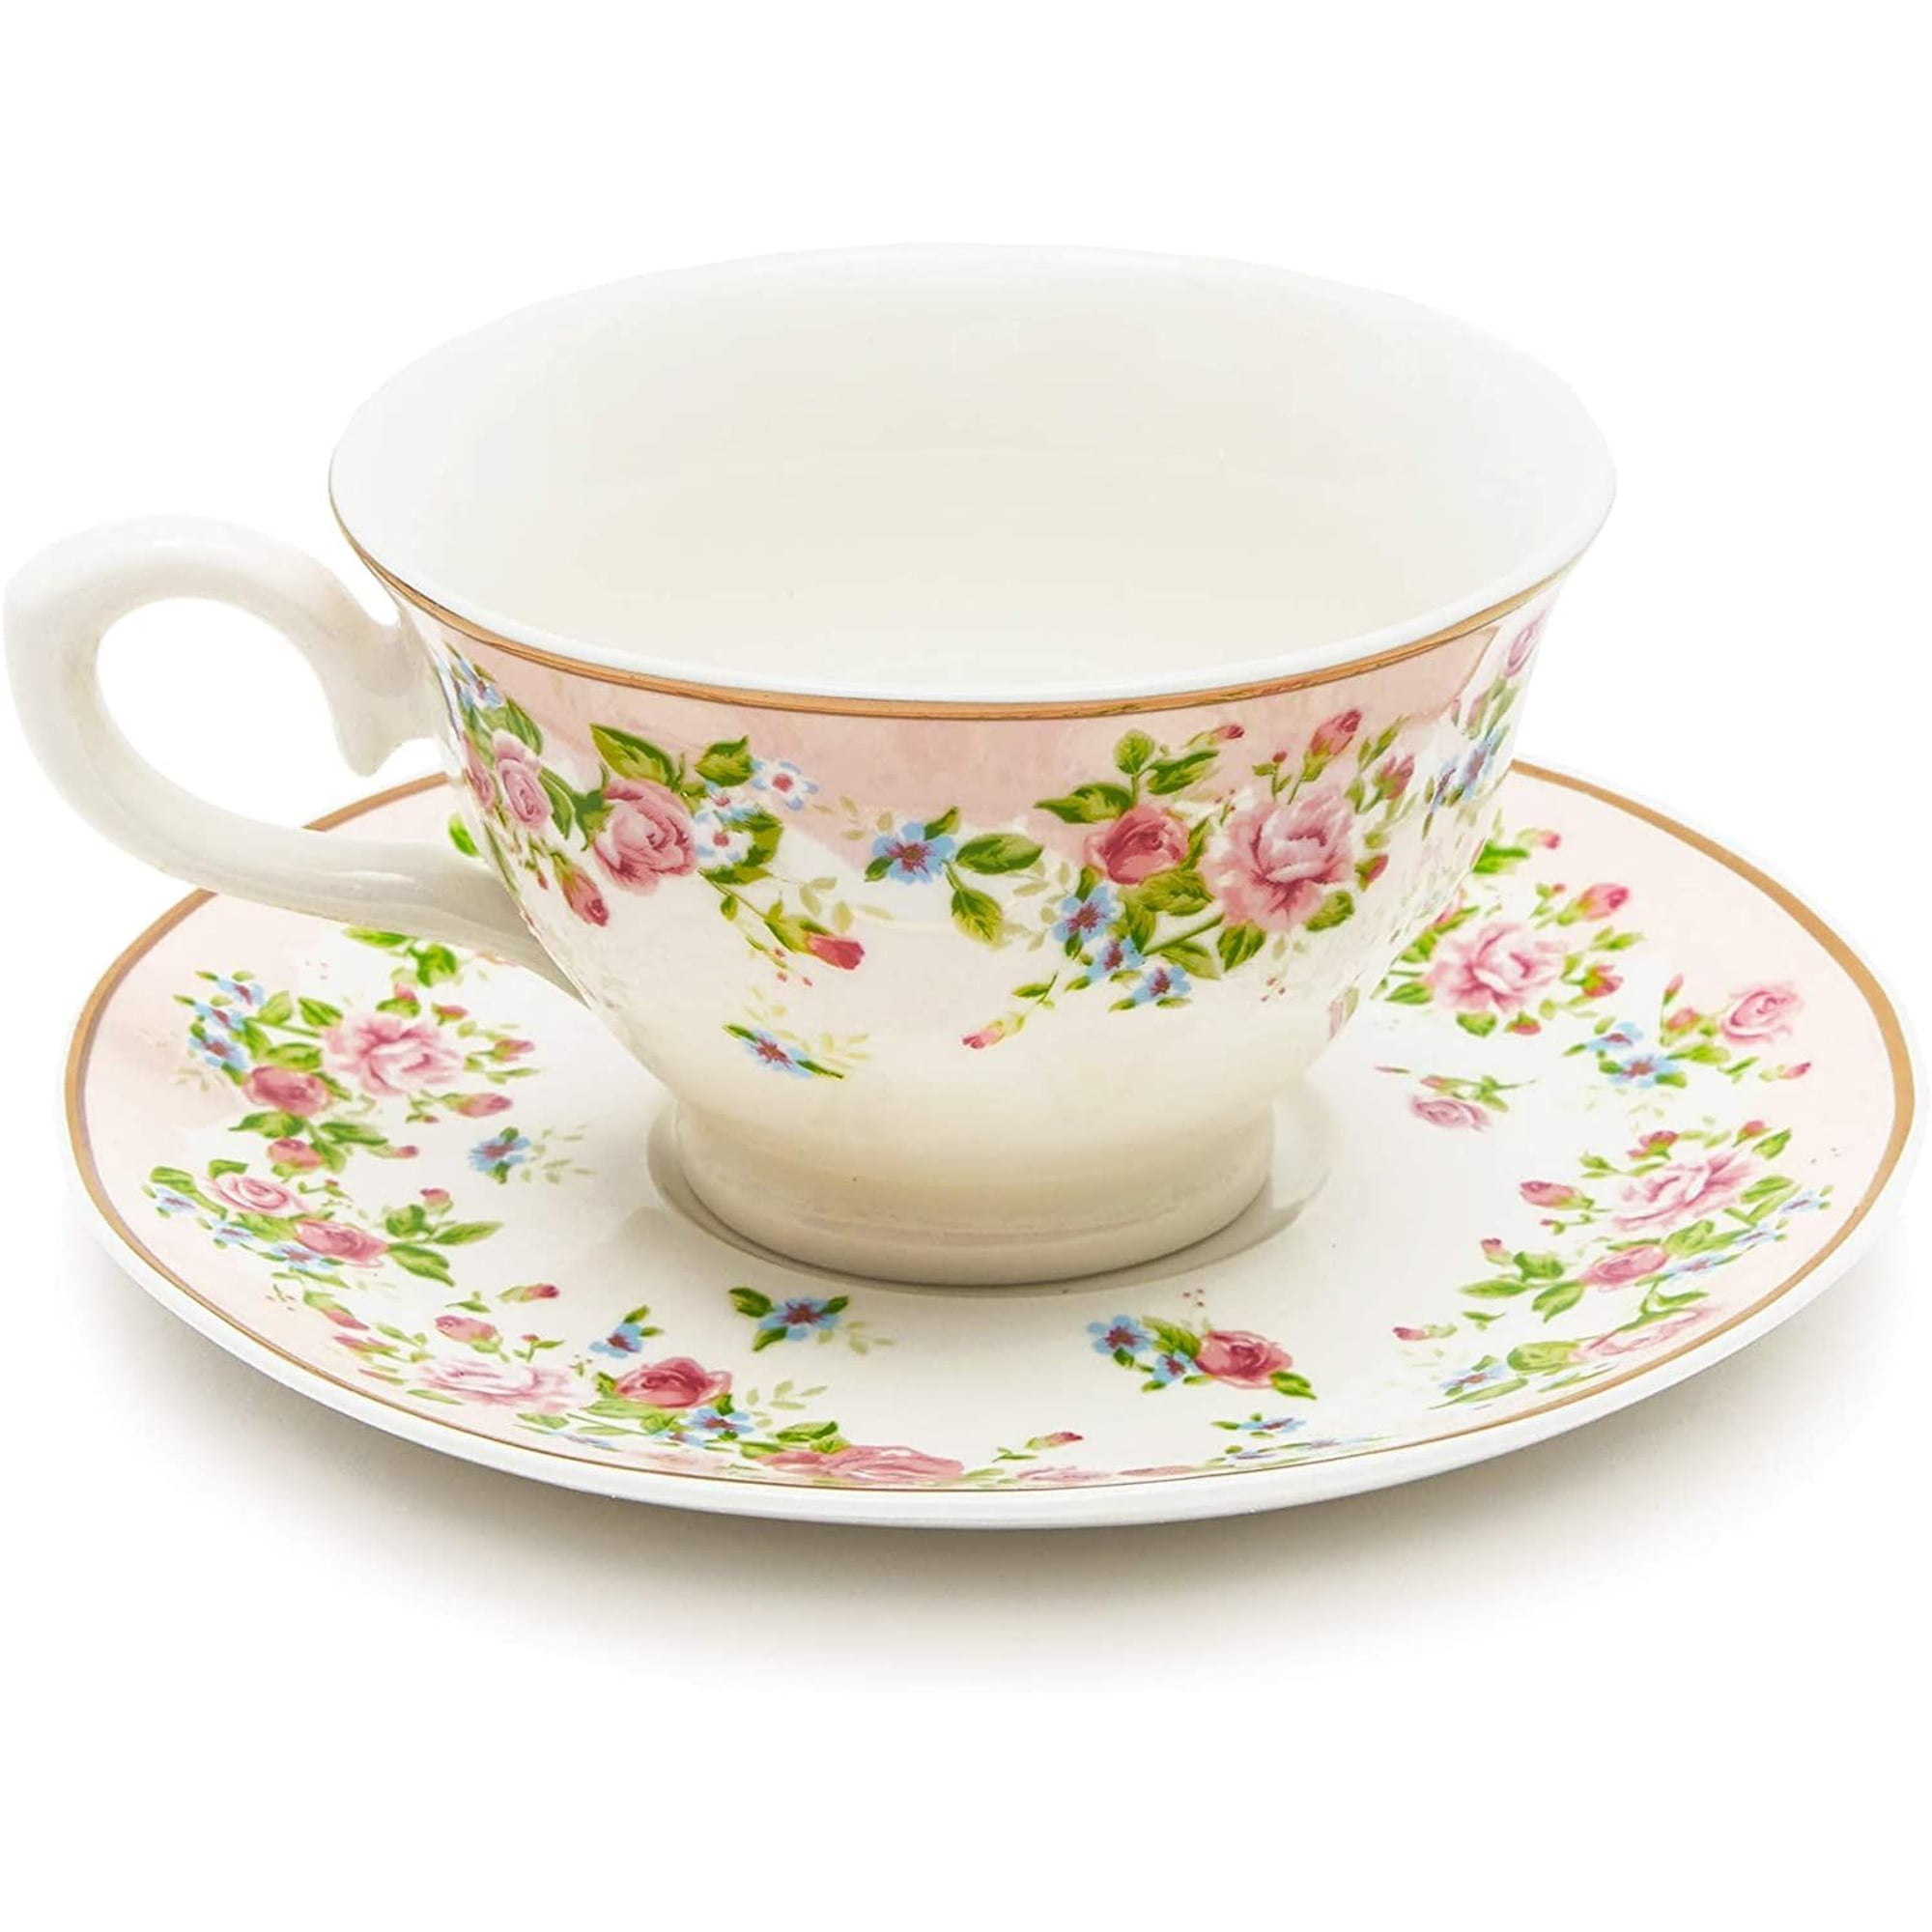 Sparkle And Bash Set Of 6 Vintage Floral Tea Cups And Saucers For Tea Party  Supplies, Blue, Pink, 8oz : Target